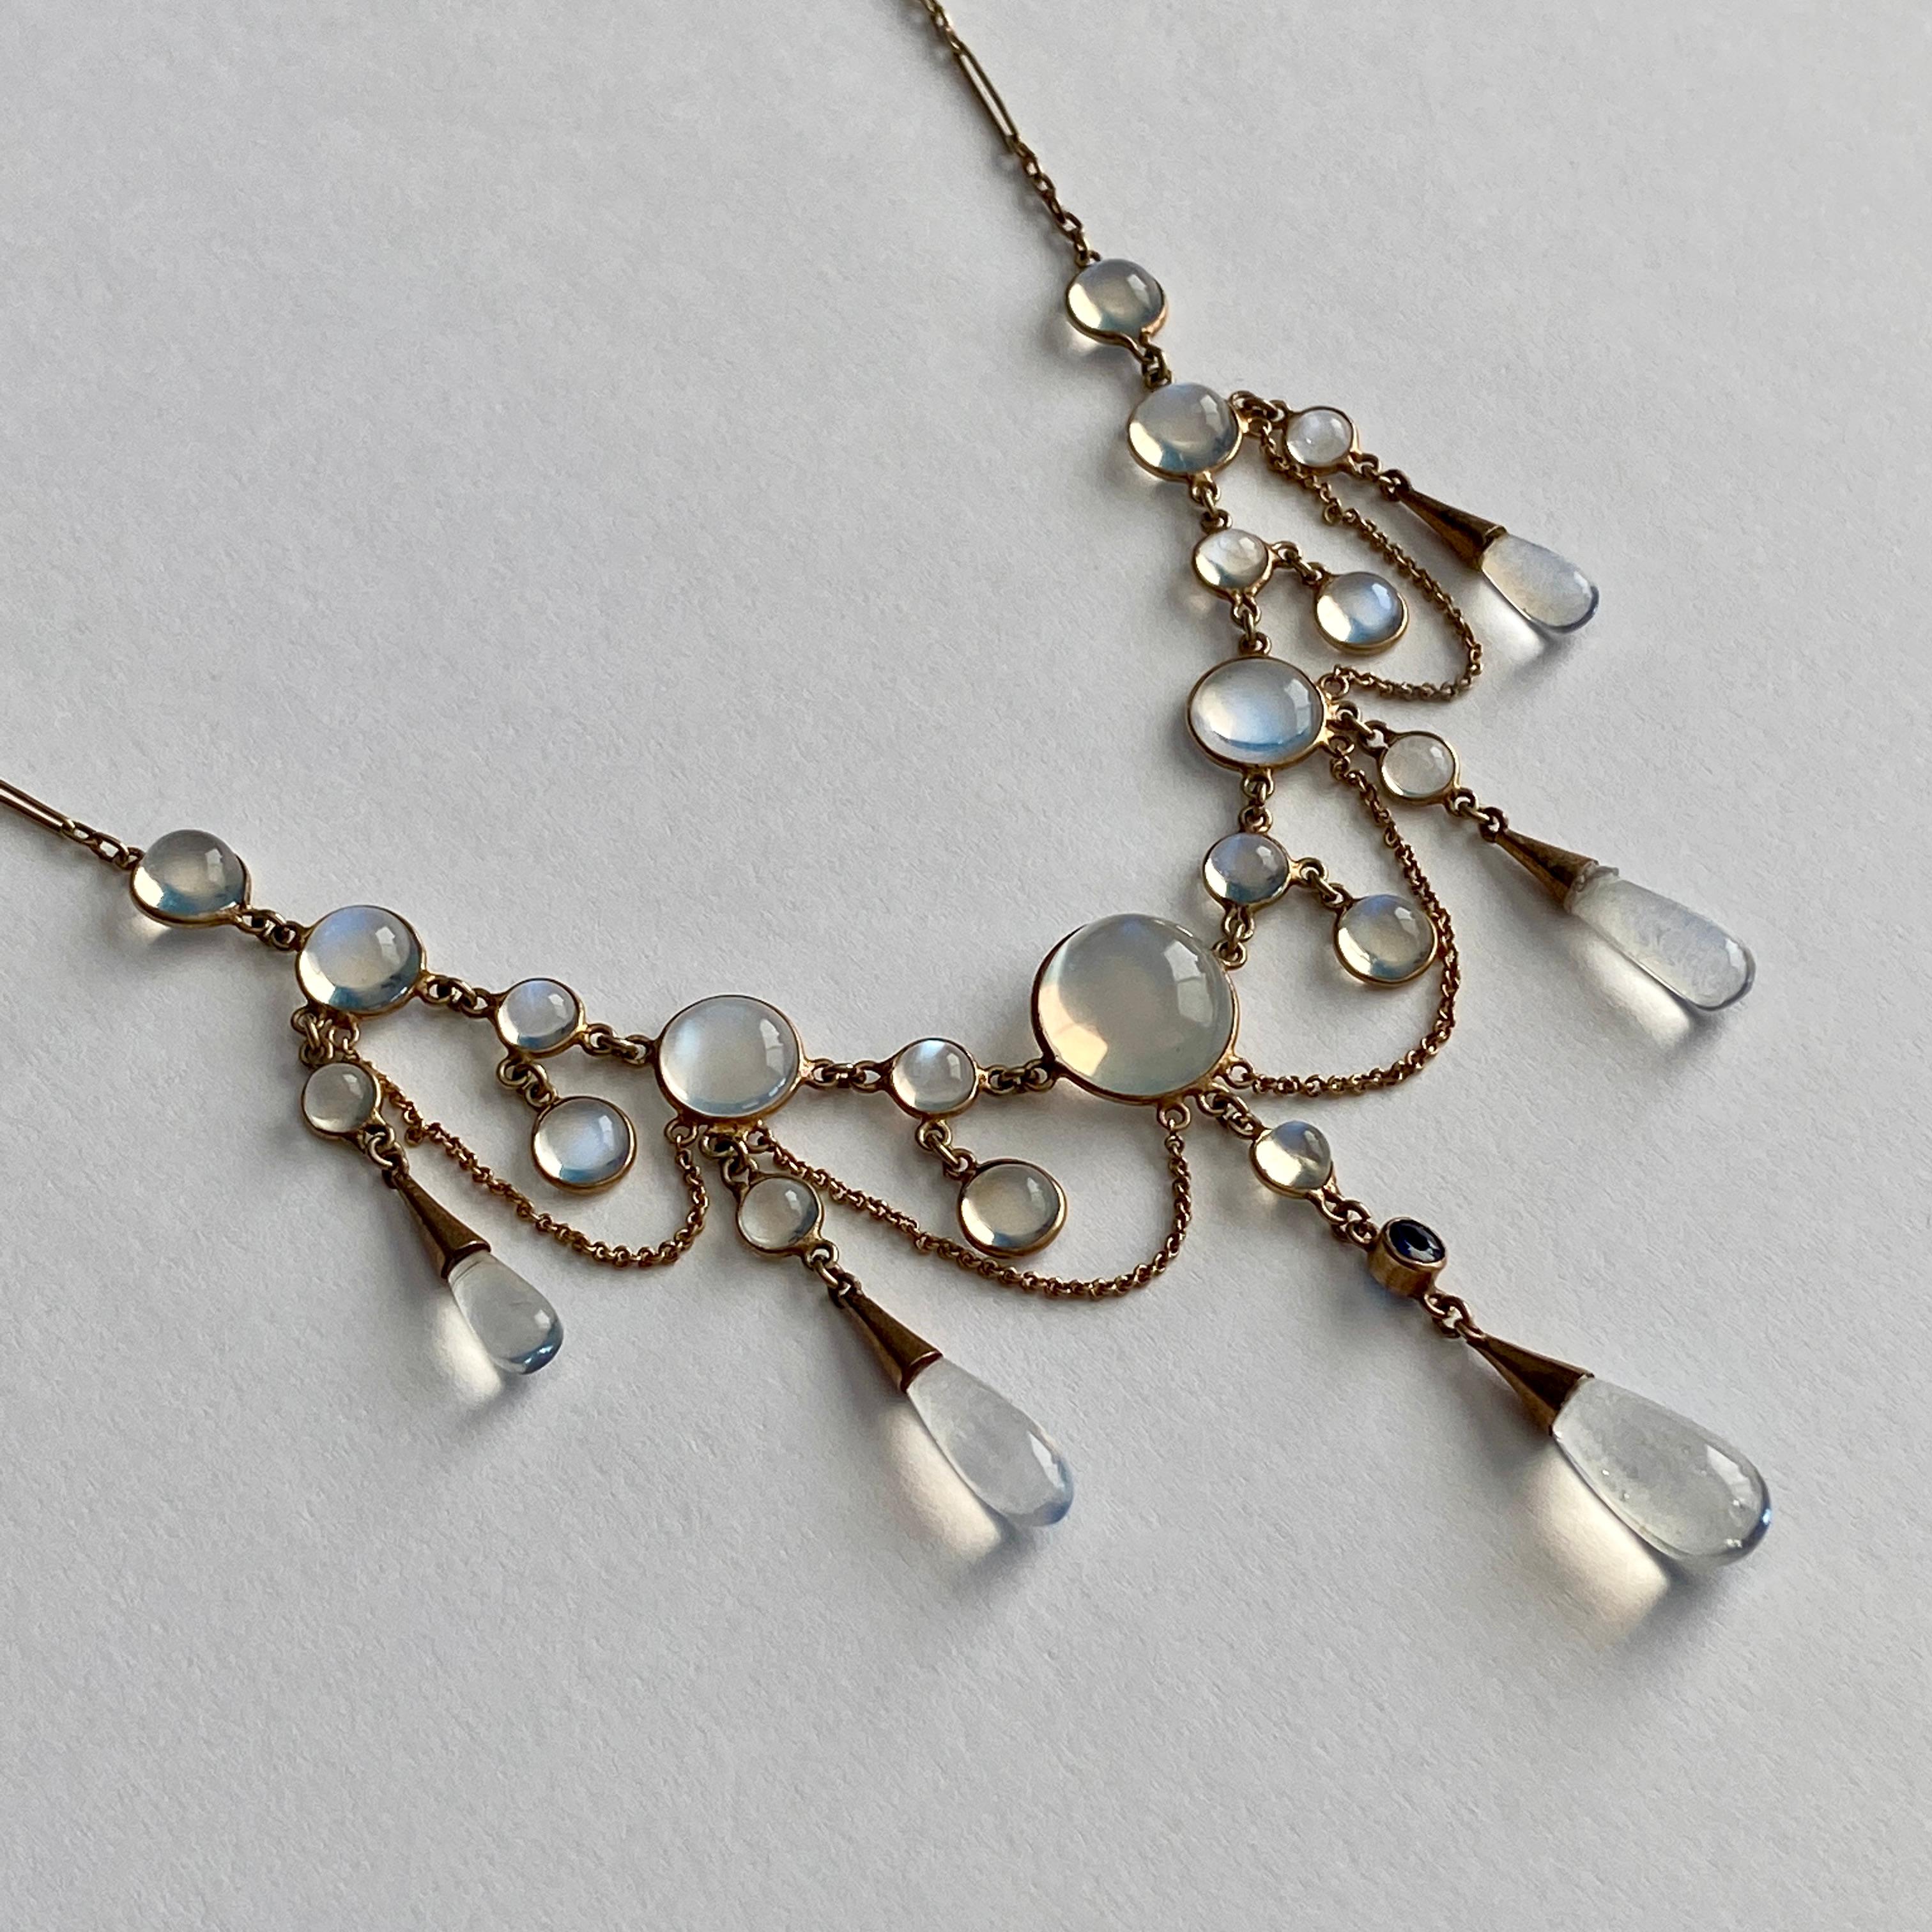 Details:
Sweet Edwardian Moonstone festoon necklace set in 9K yellow gold. This necklace has feminine gold drapes gold chain accented with moonstone drops, and a sweet natural blue sapphire in the center. The moonstones have a nice blue flare, and